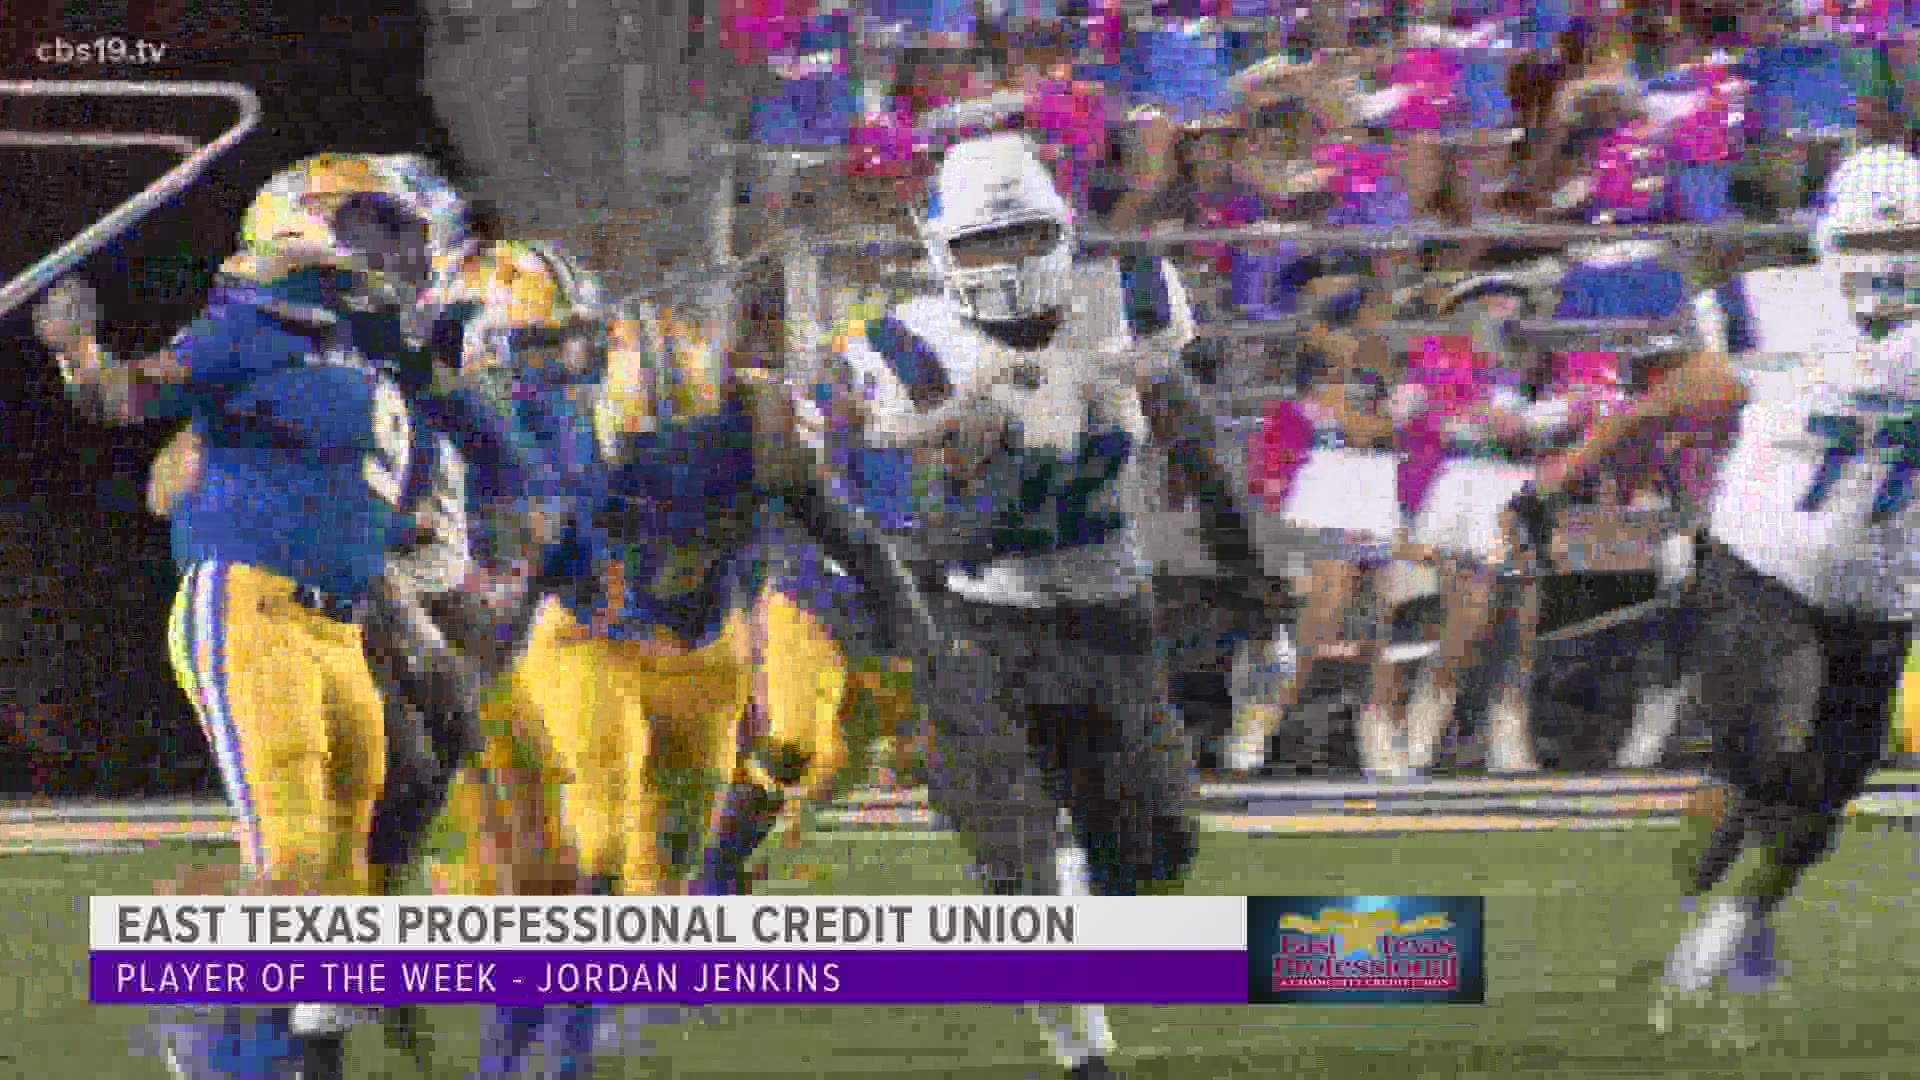 Jenkins rushed 26 times for 285 yards and four touchdowns against Chapel Hill in Week 5 of the Texas high school football season. Lindale dominated Lufkin 52-6.